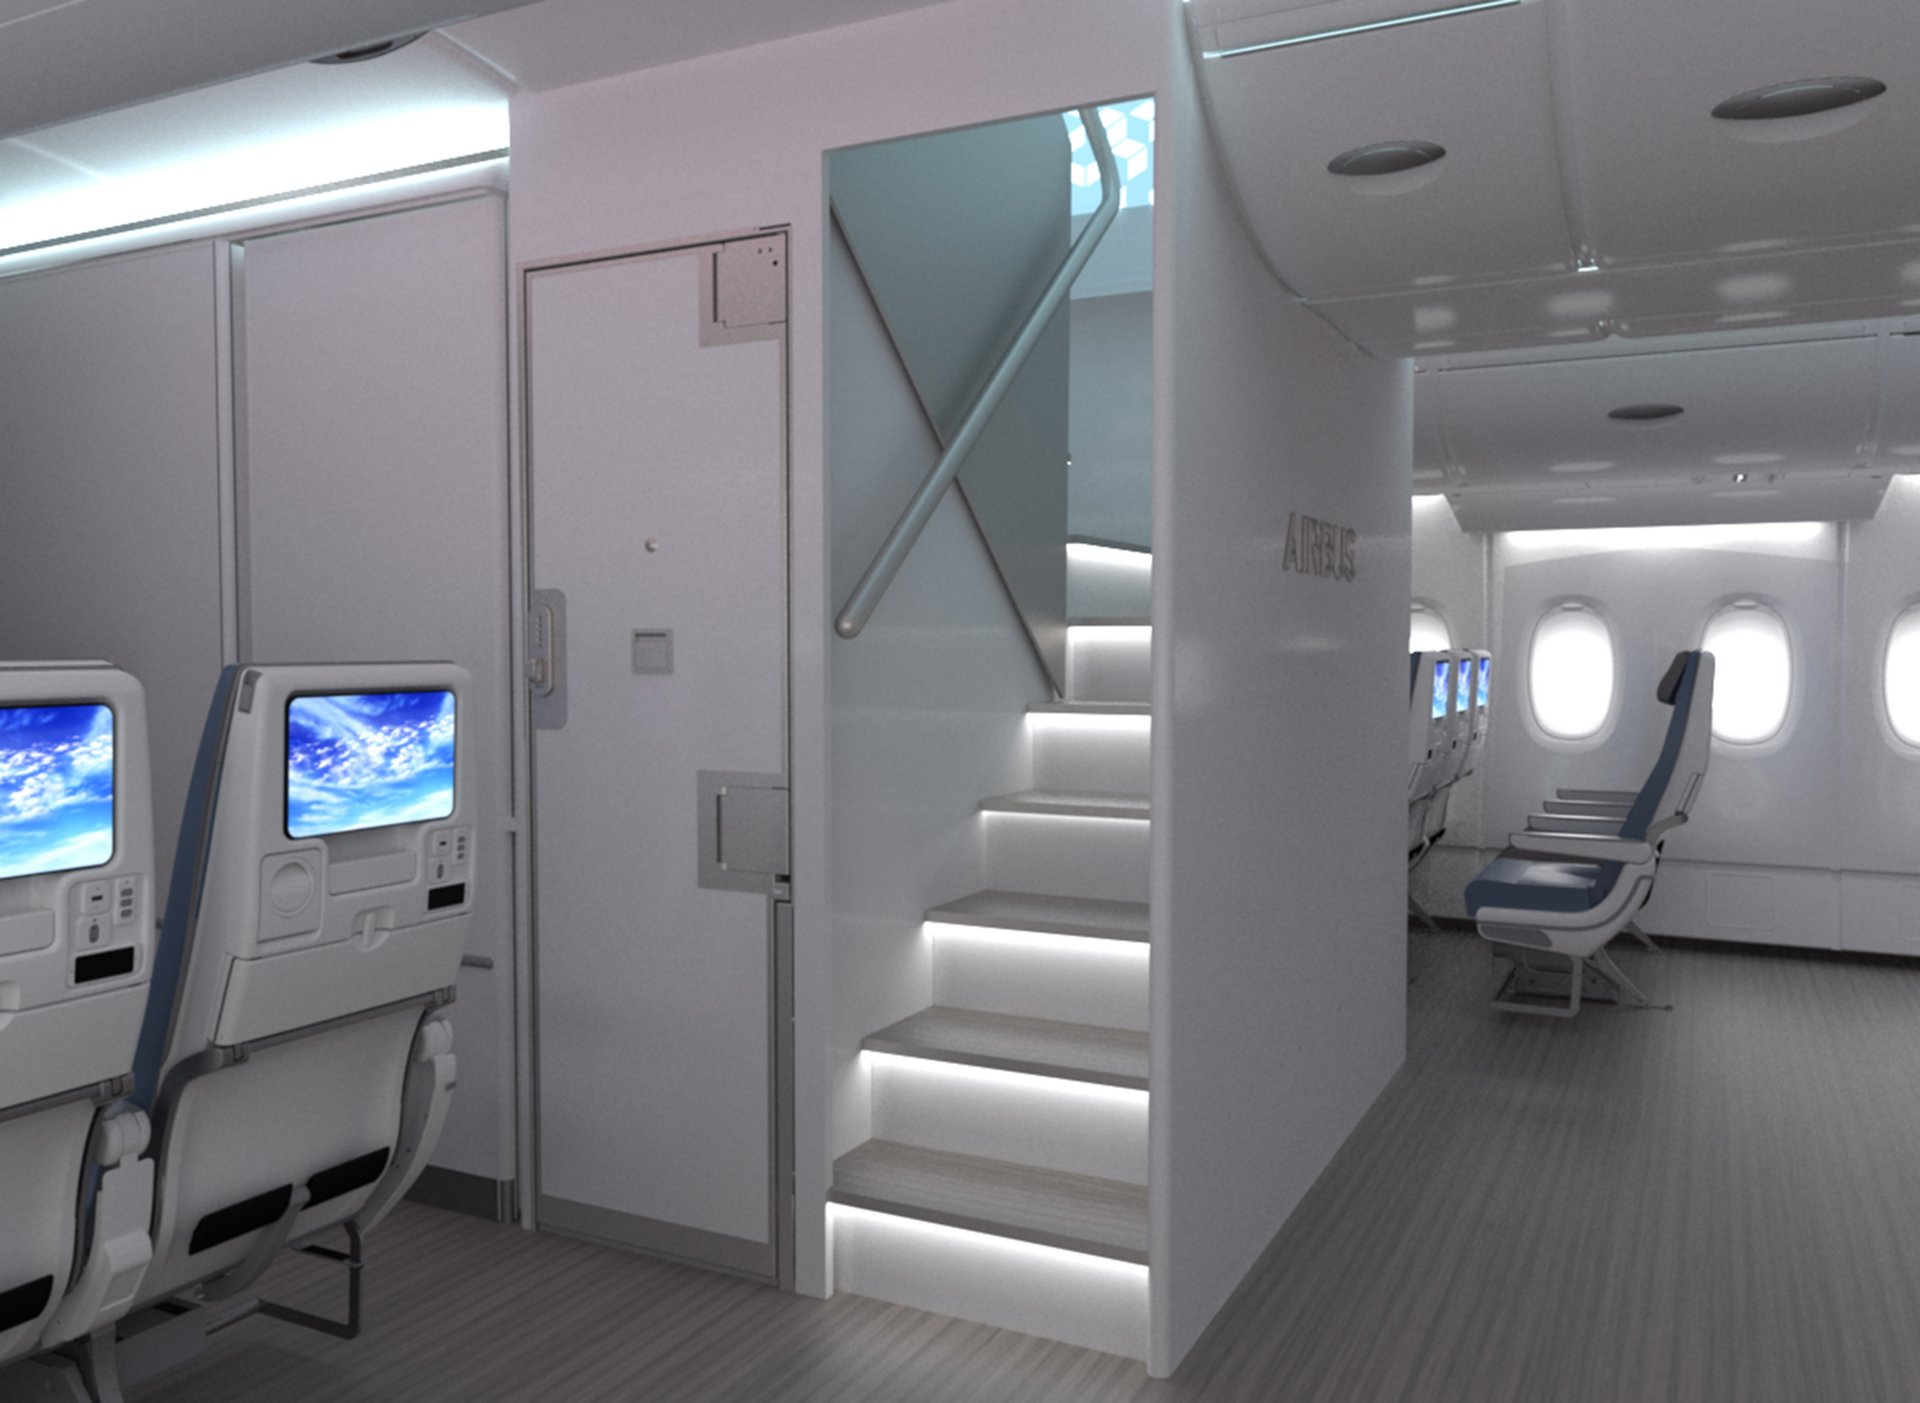 Airbus Develops Package Of New A380 Cabin Enablers